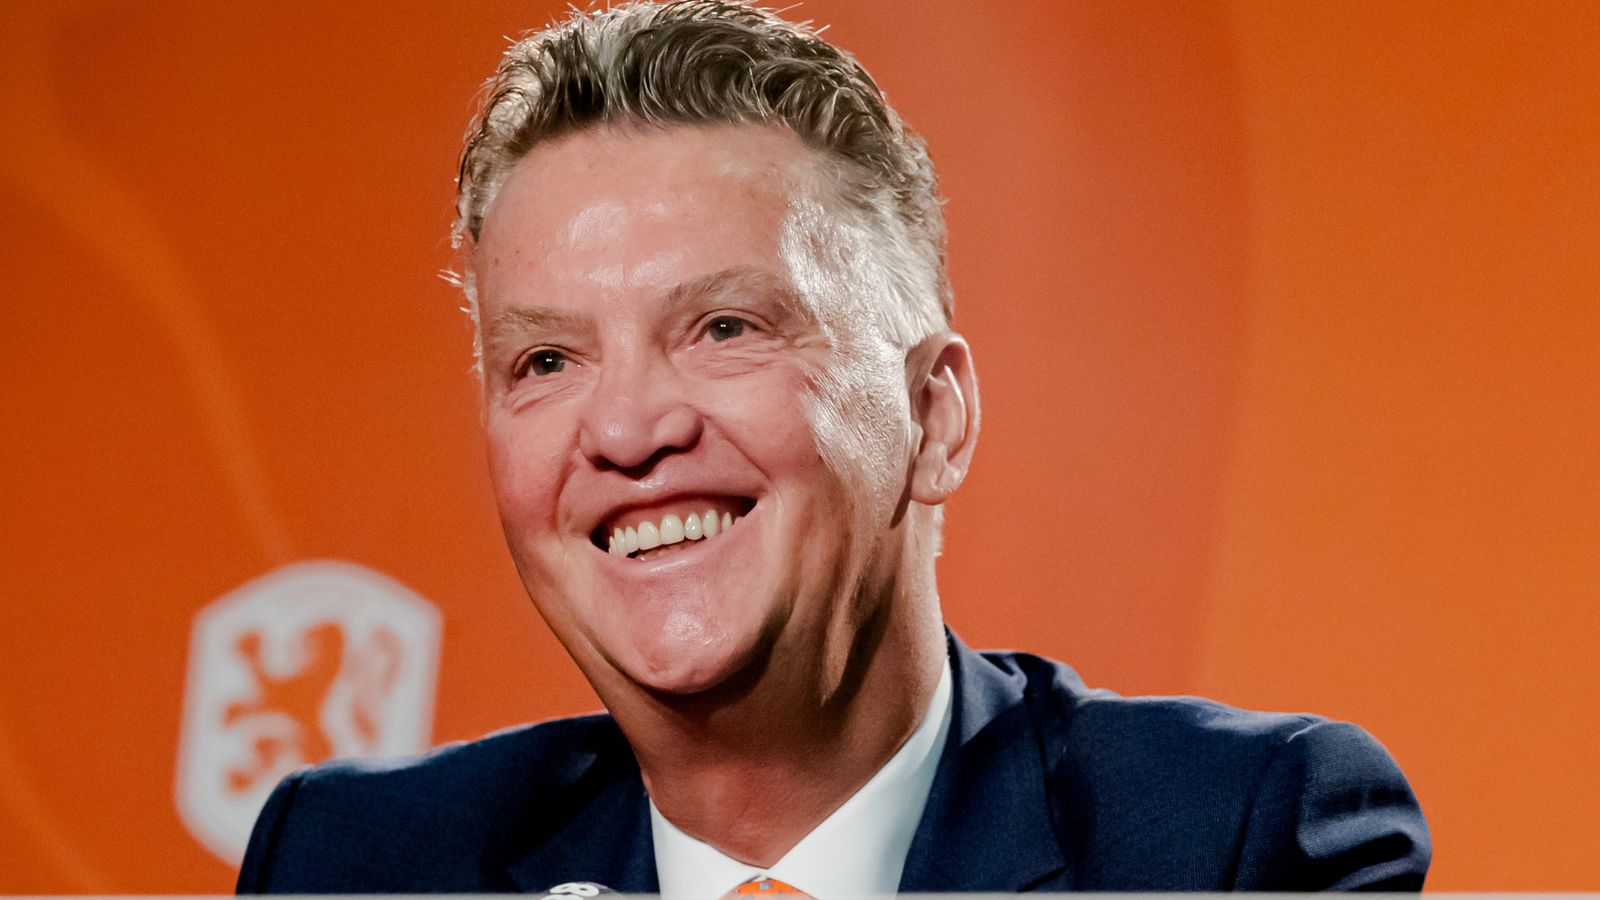 Louis van Gaal: Netherlands manager says he would have appointed himself  and asks &#39;who else but me?&#39; | Football News | Sky Sports